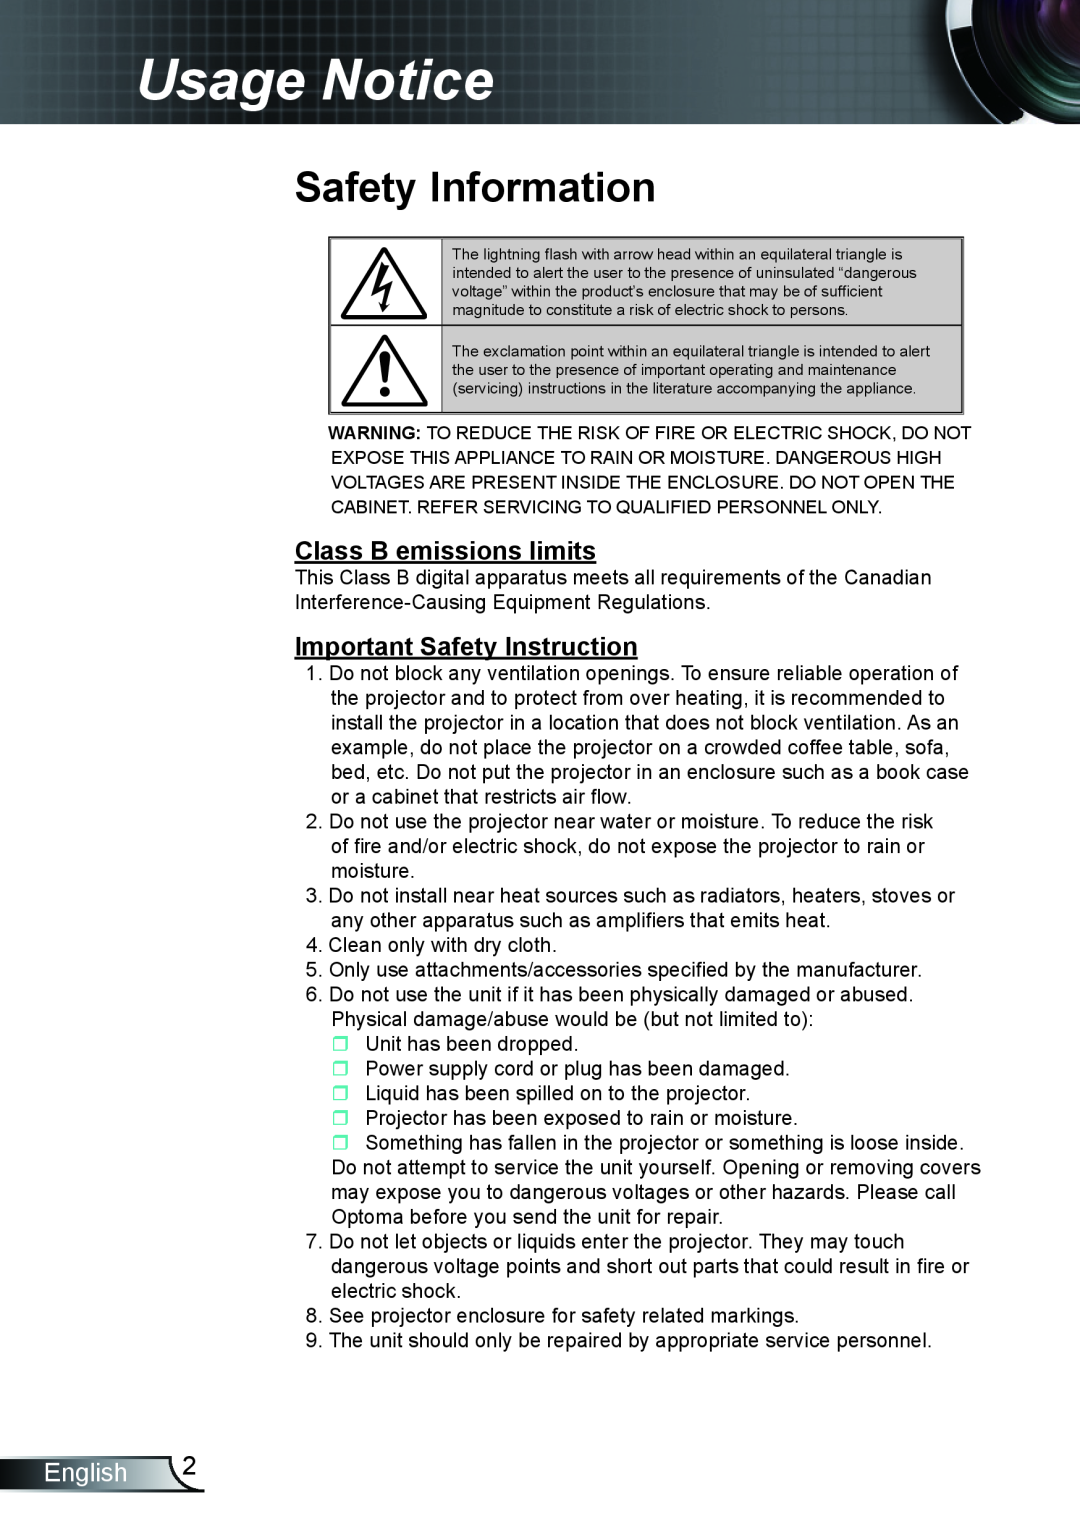 Optoma Technology EX542 Usage Notice, Safety Information, Class B emissions limits, Important Safety Instruction, English 